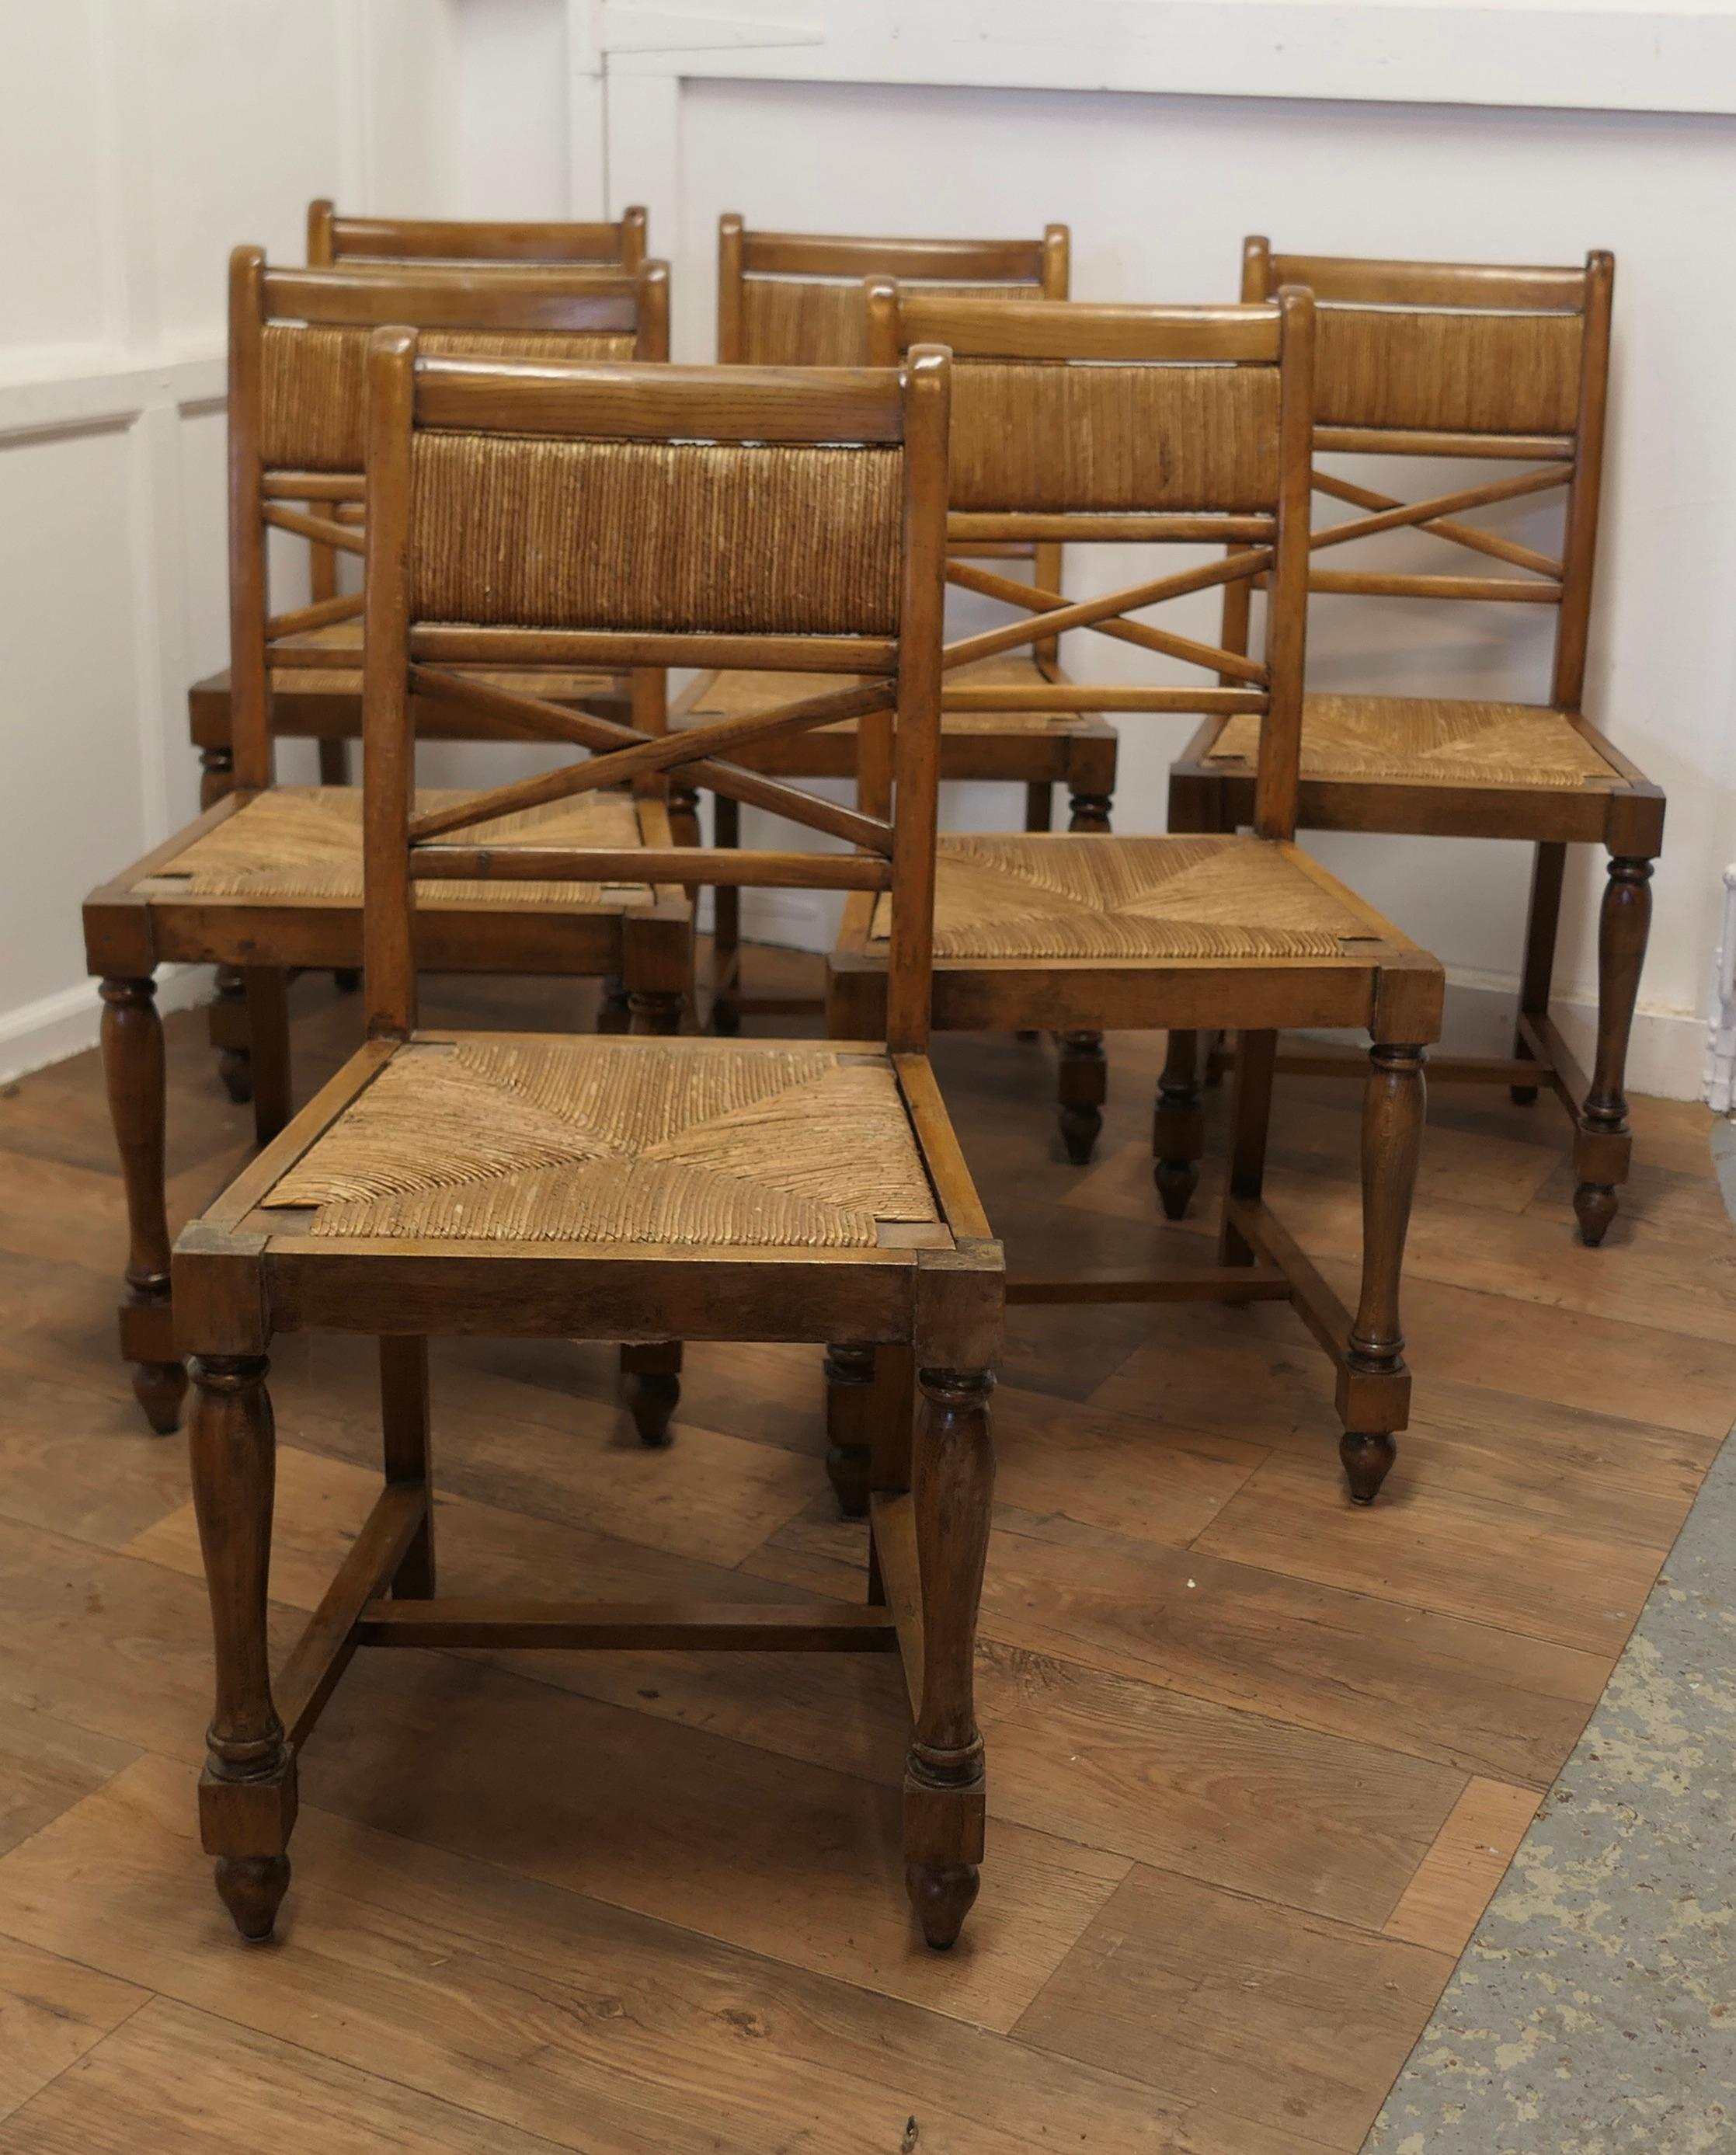 A Set of 6 French Golden Oak Country Dining Chairs 

This is a very attractive set of Golden Oak chairs, 6 in all
The chairs are a classic design and made from solid Oak and in a good colour
The chairs  are roomy and comfortable and the backs and